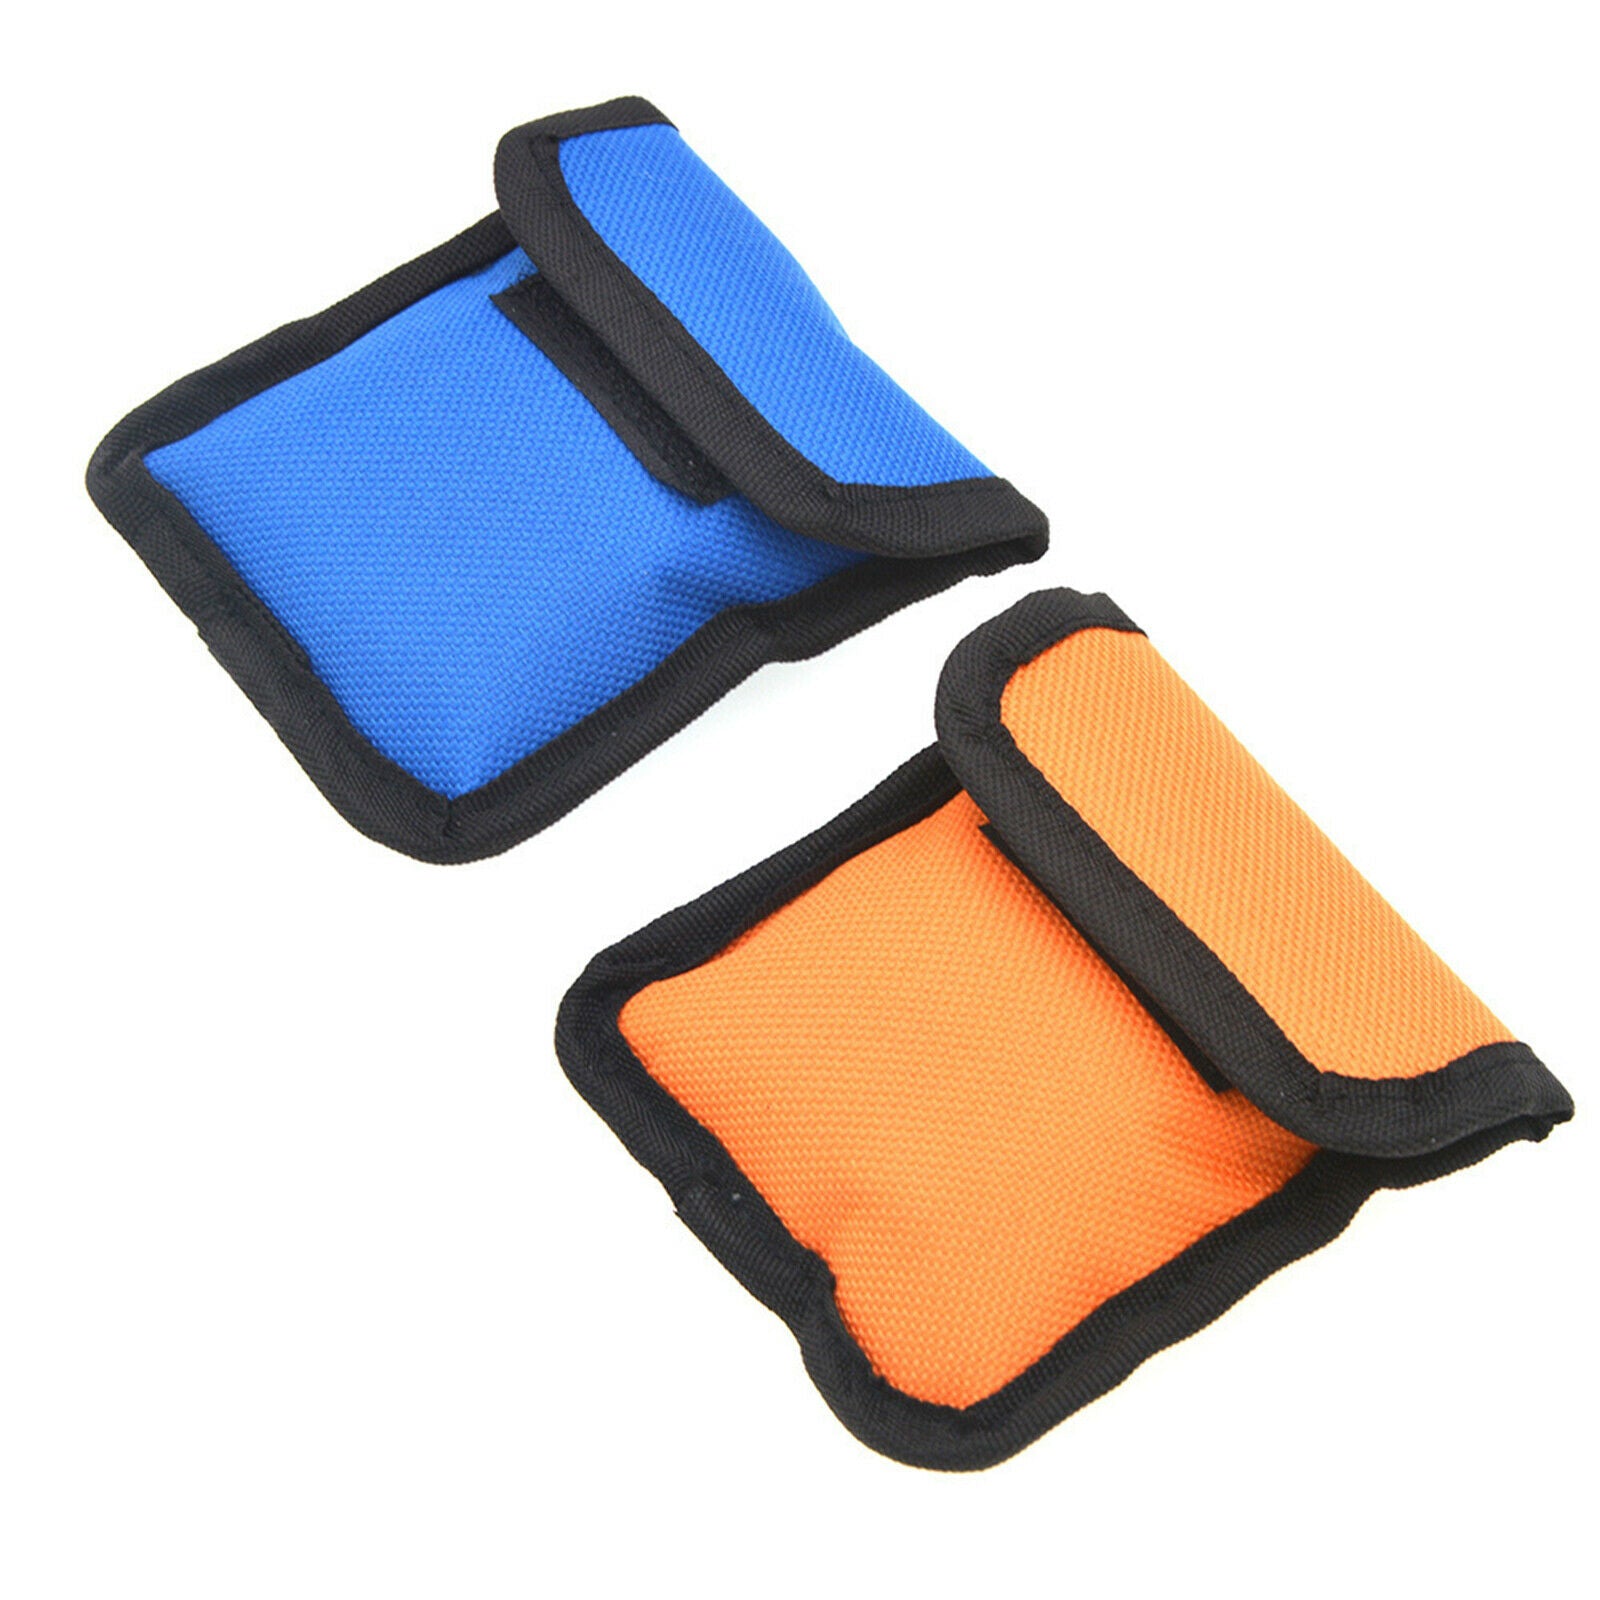 Photography Daylight Type Color Viewing Filter Set for Studio Professional